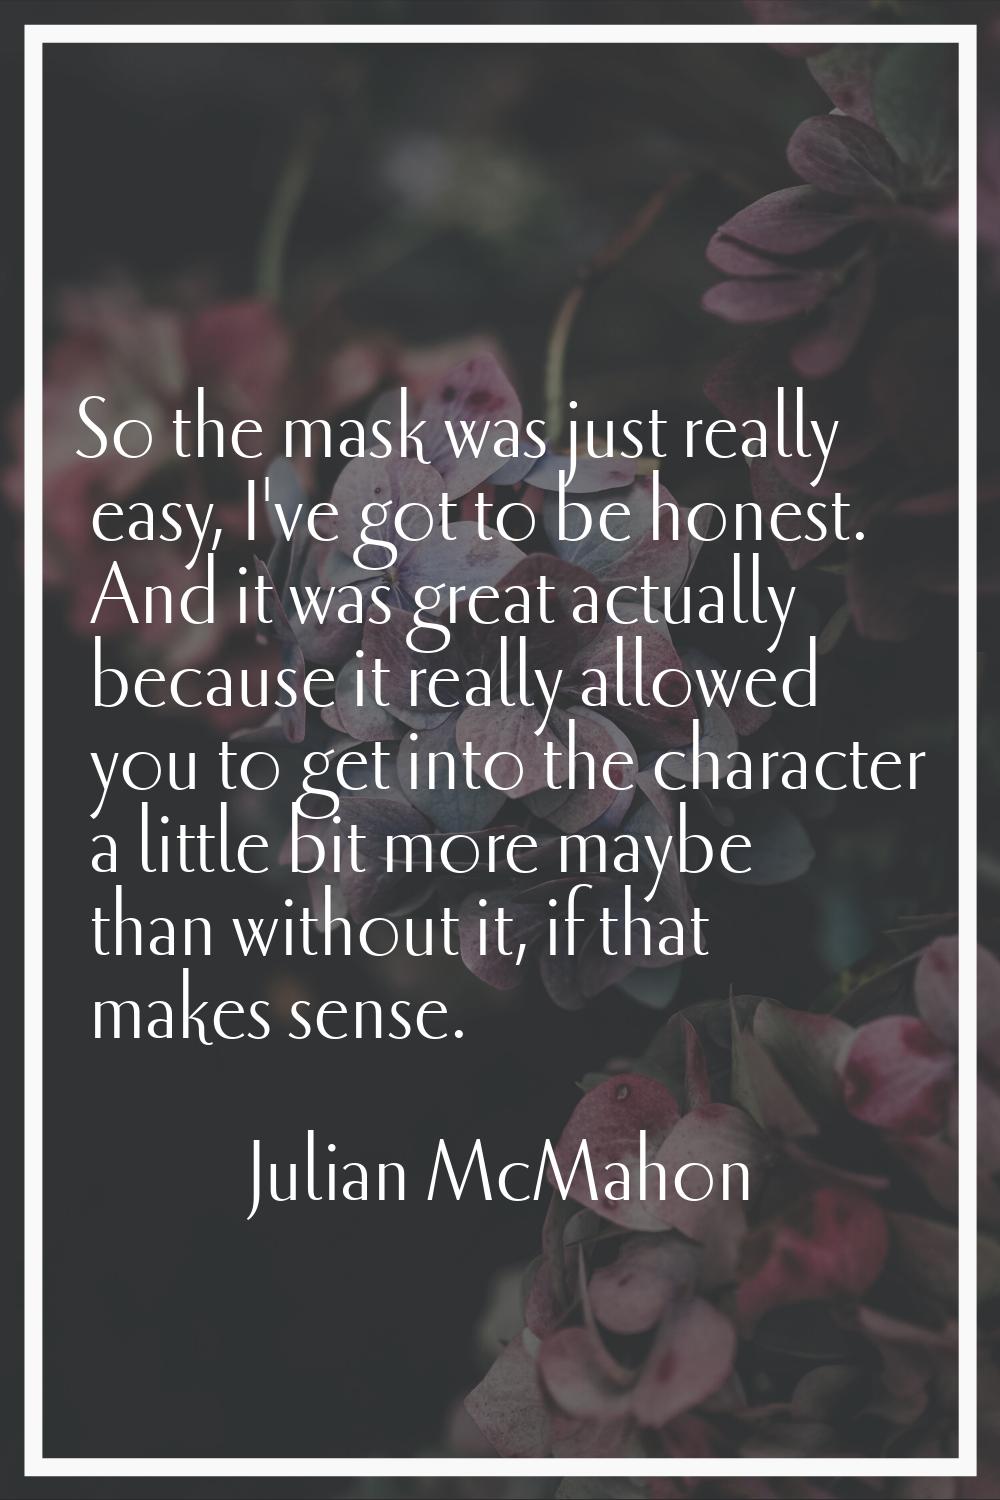 So the mask was just really easy, I've got to be honest. And it was great actually because it reall